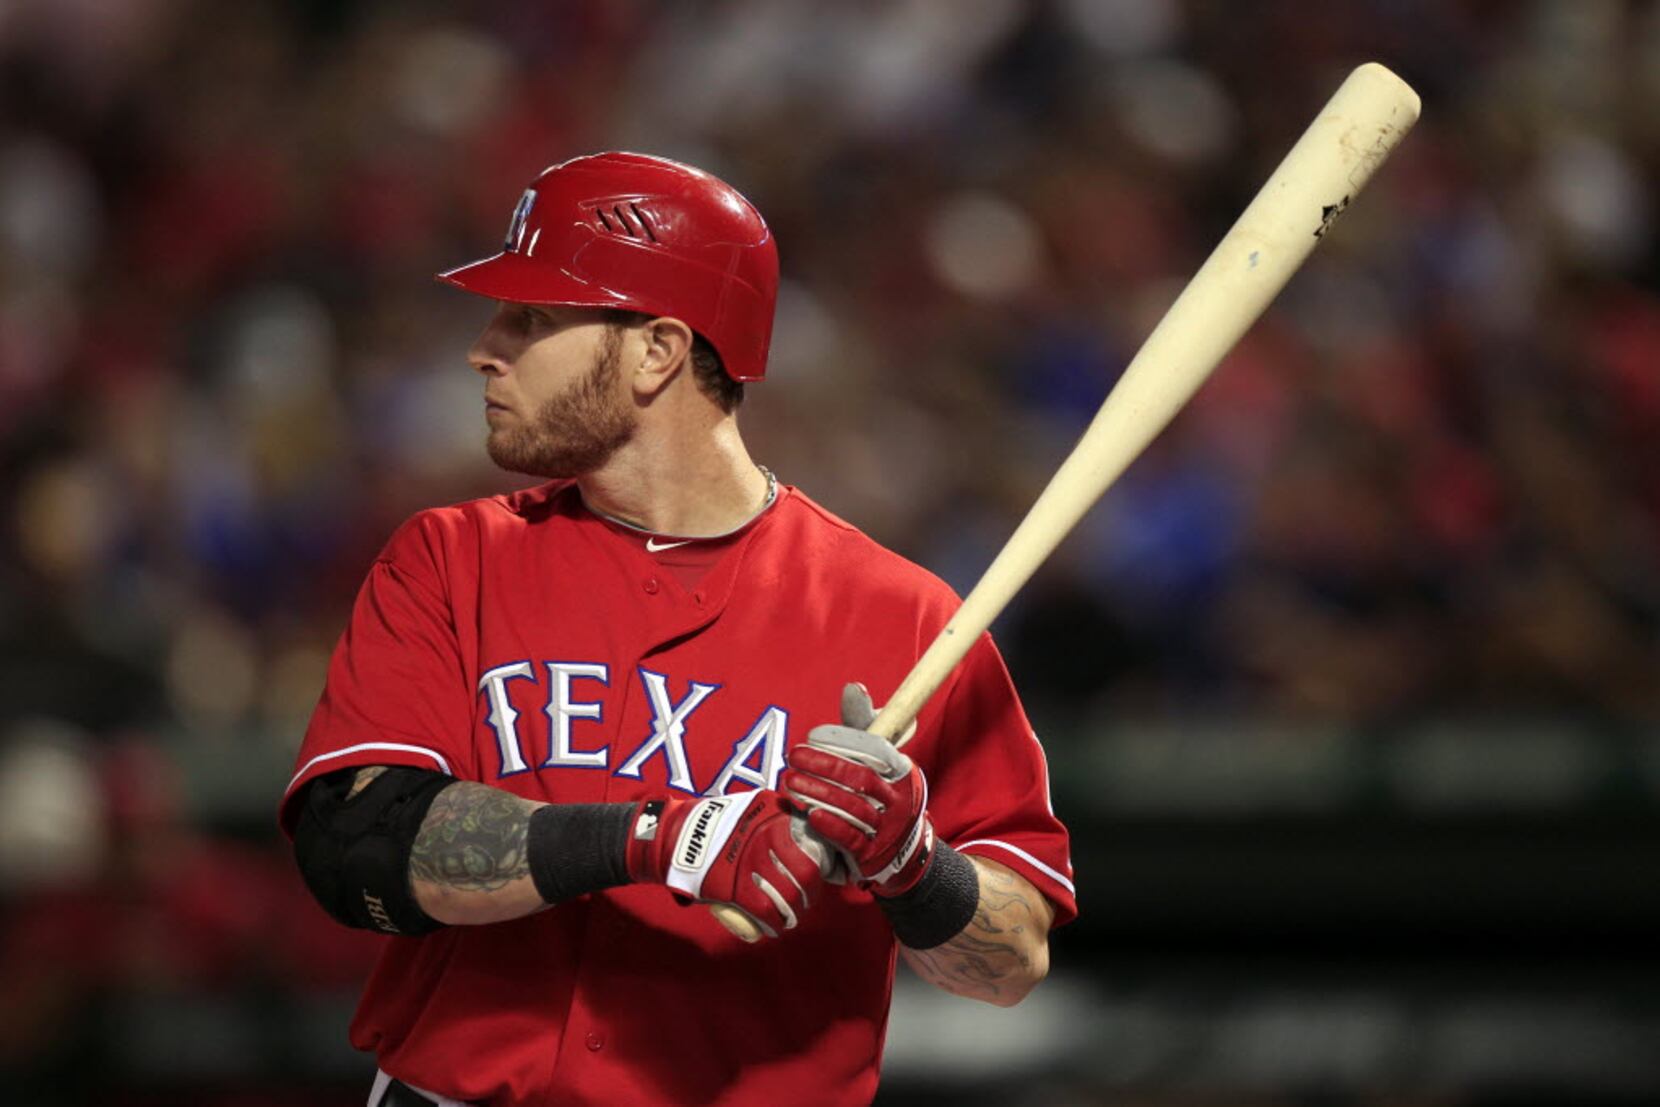 On April 13, Josh Hamilton hits his first of many home runs as an Angel.